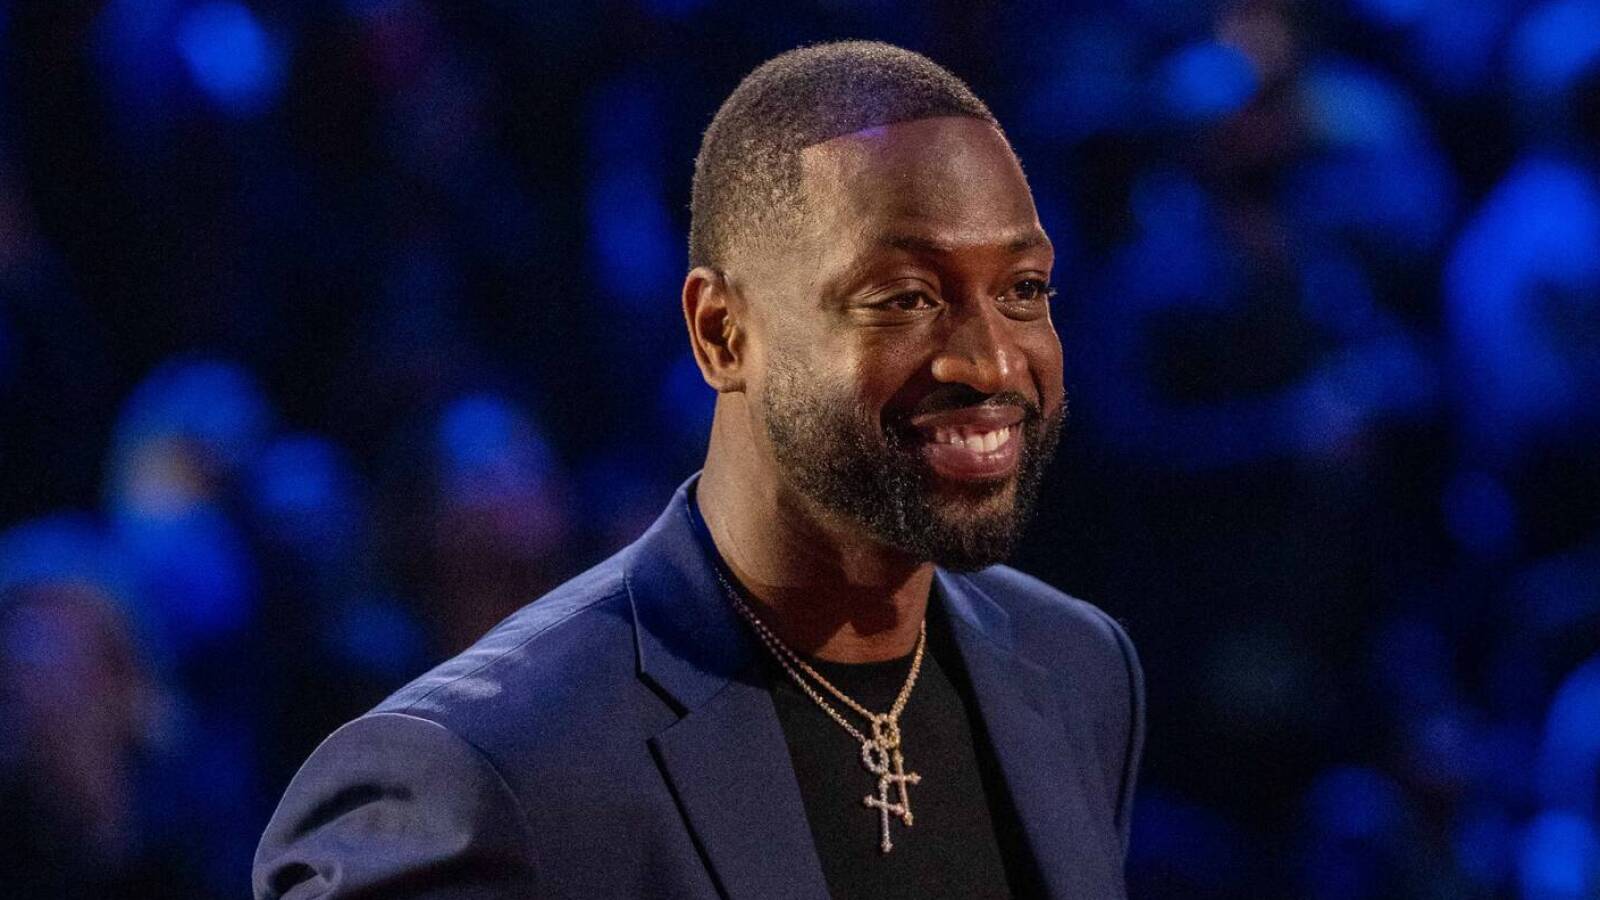 Dwyane Wade predicts Hall of Fame for Heat star